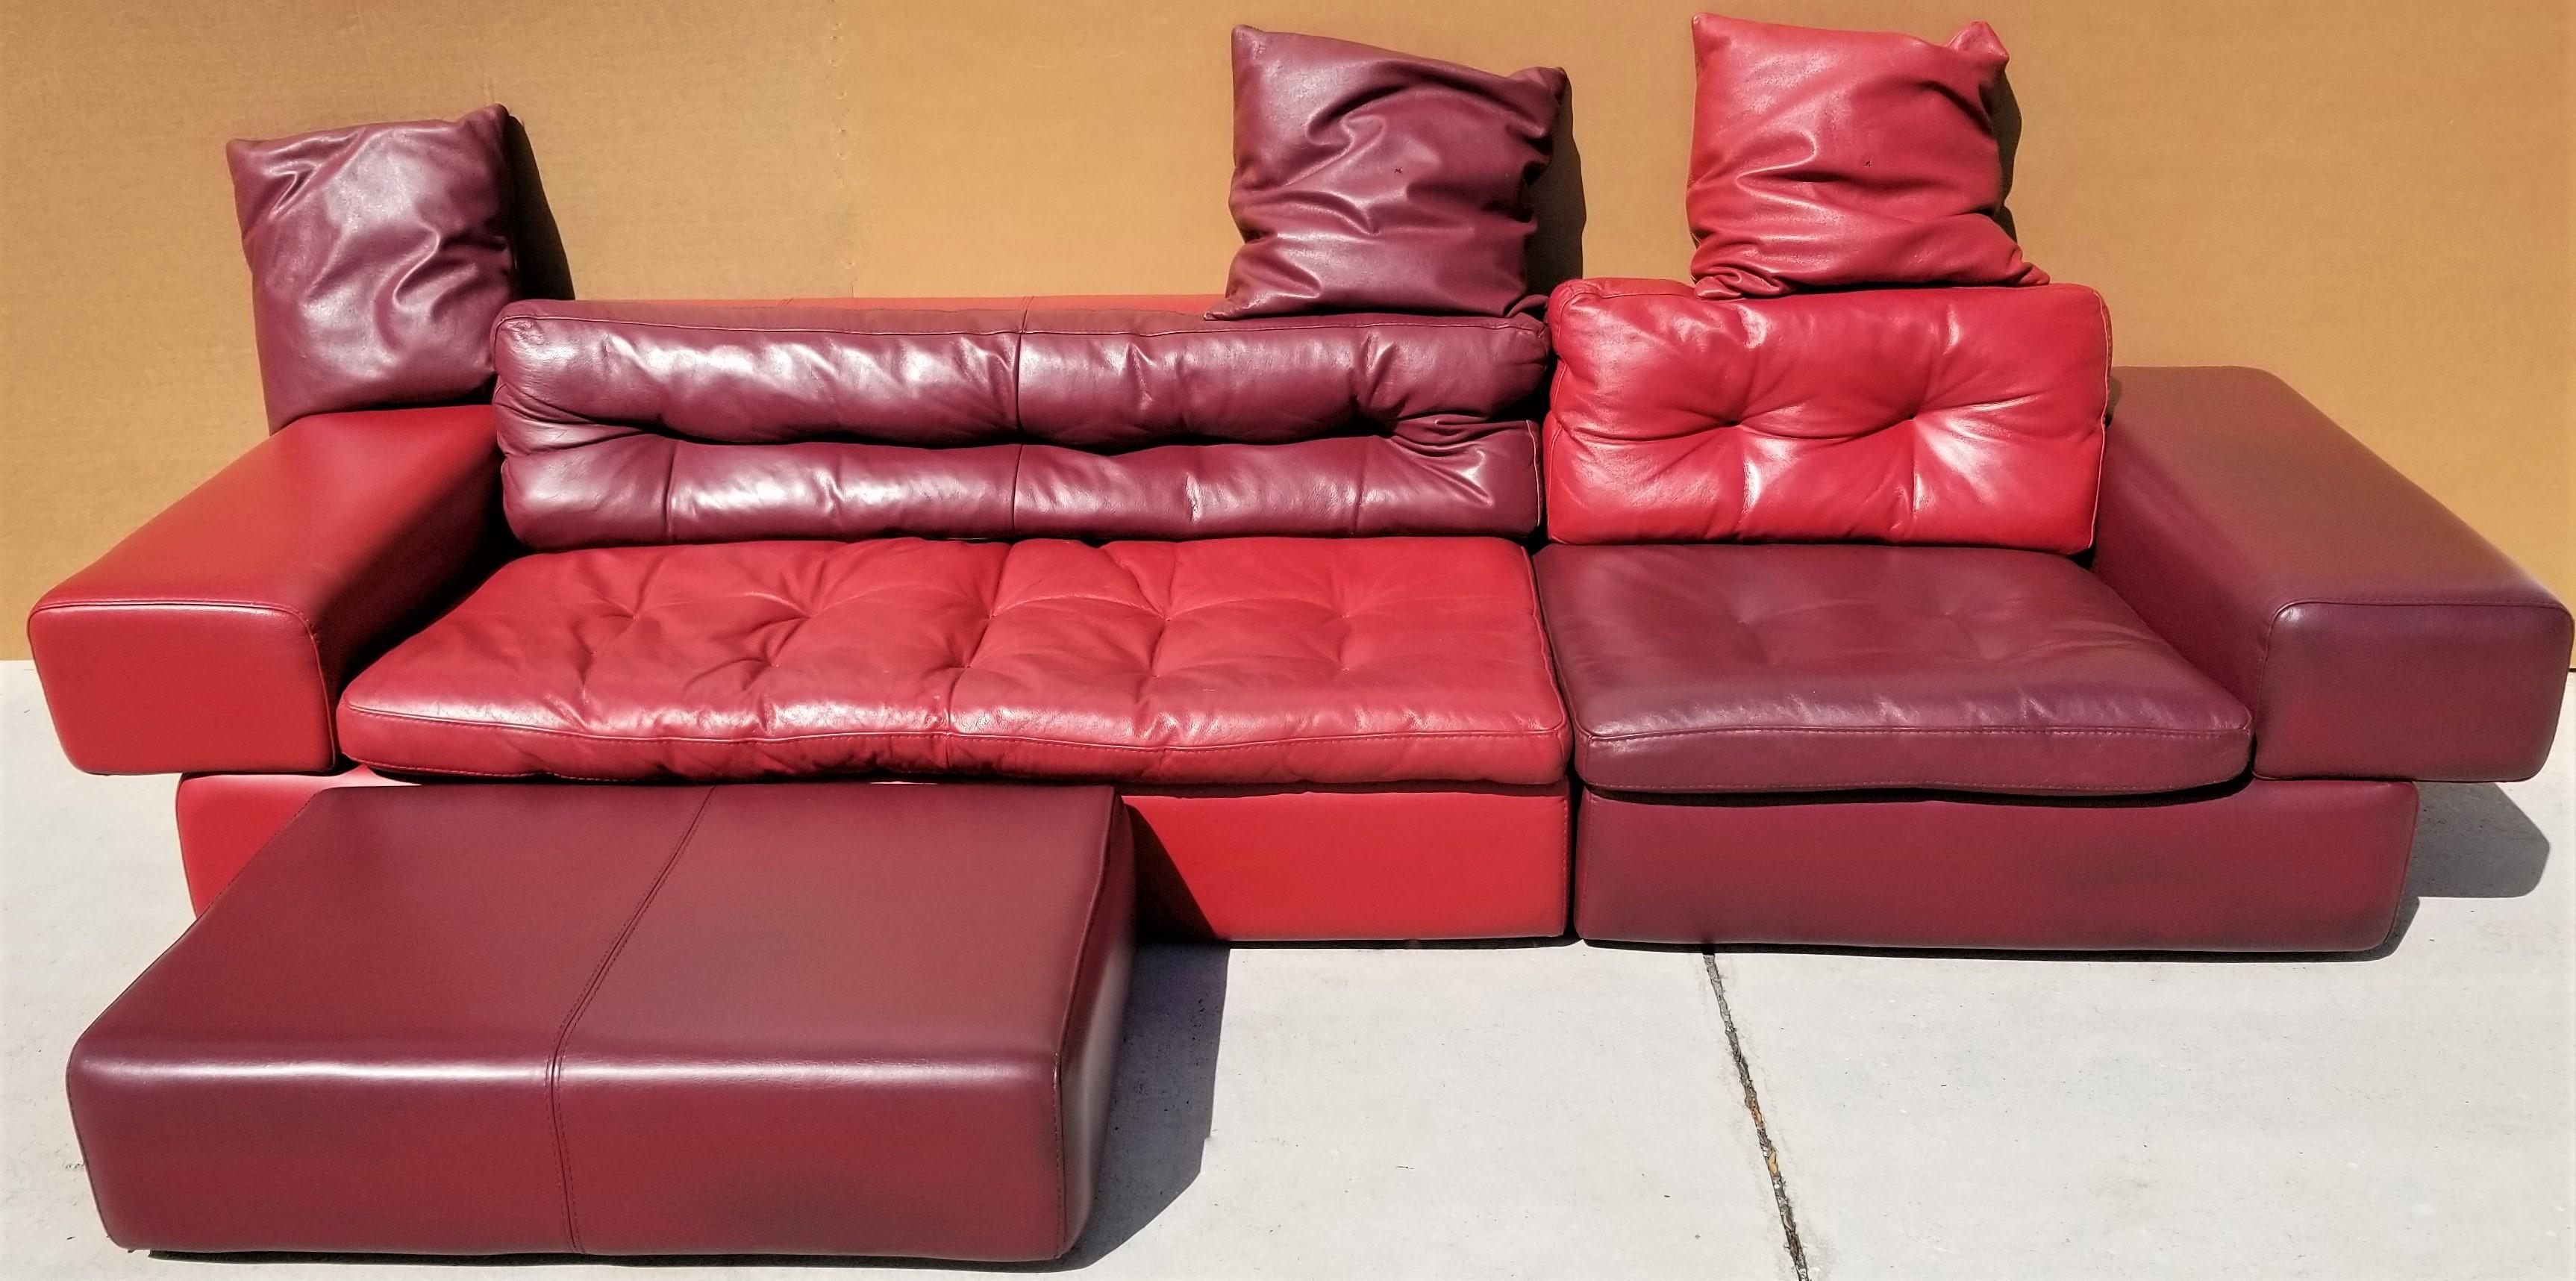 bobs furniture leather sectional